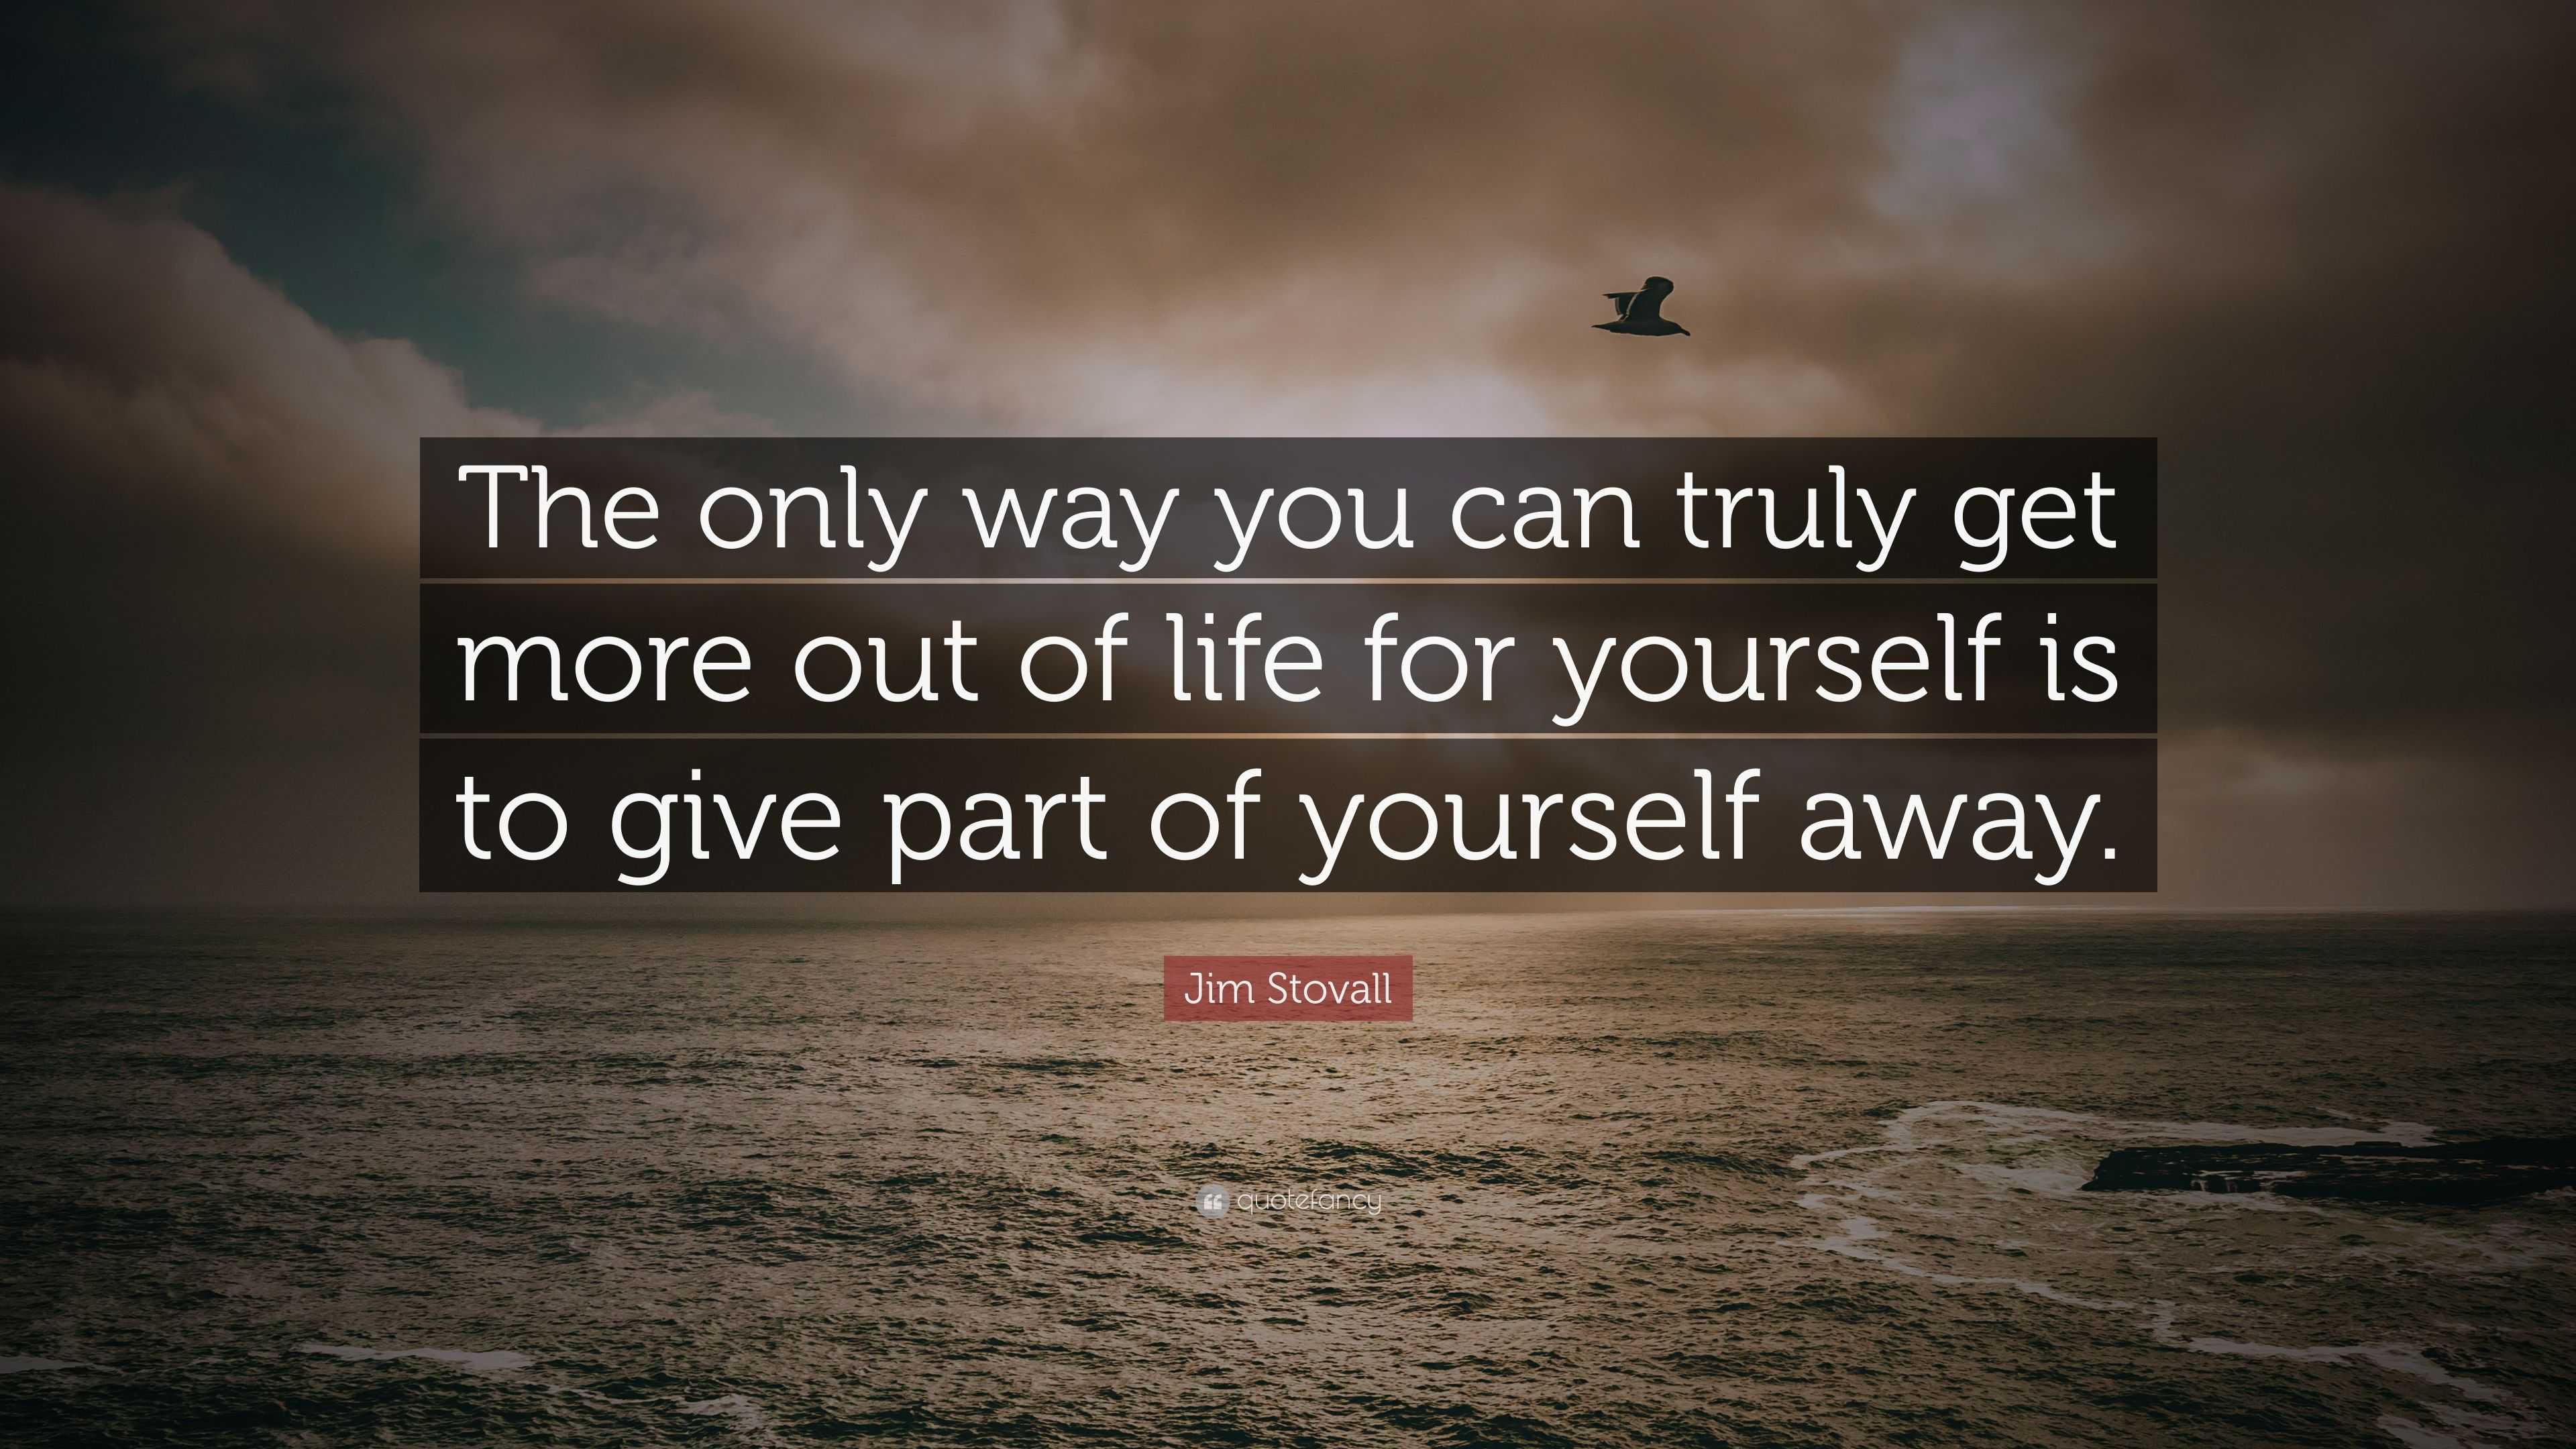 Jim Stovall Quote: “The only way you can truly get more out of life for ...